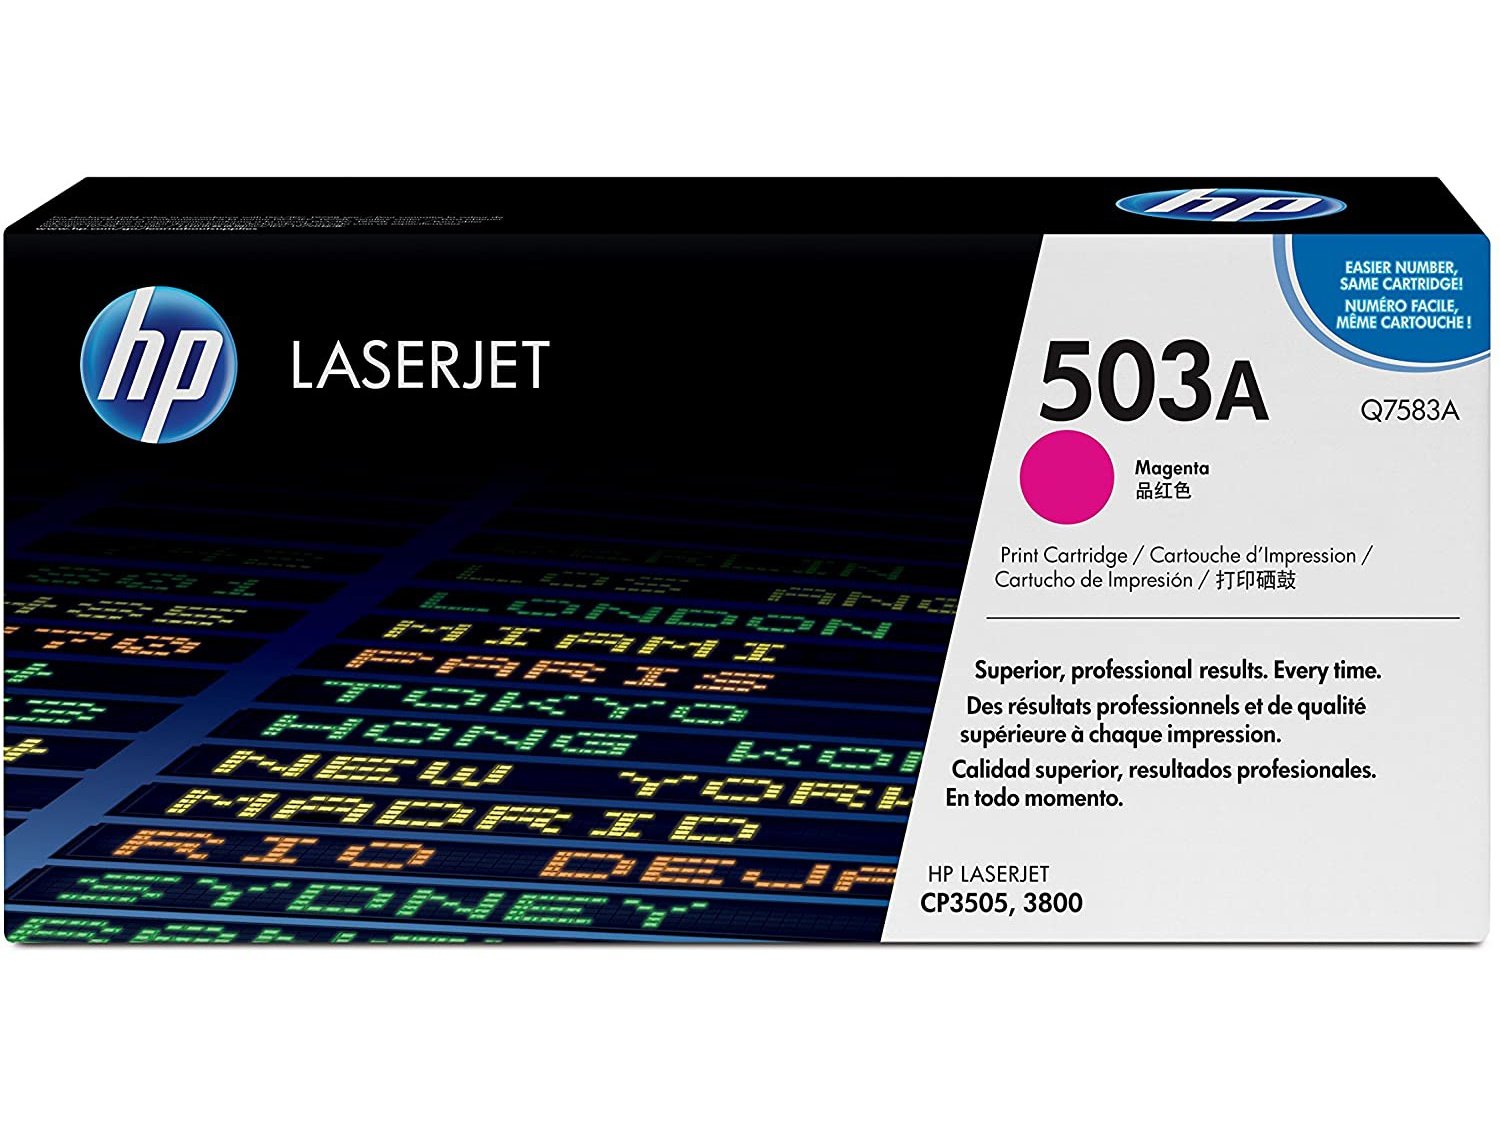 ICU Compatible/ OEM Get HP ICUQ7583A Yields 6000 Pages Q7583A Toner Cartridge - 503A Magenta